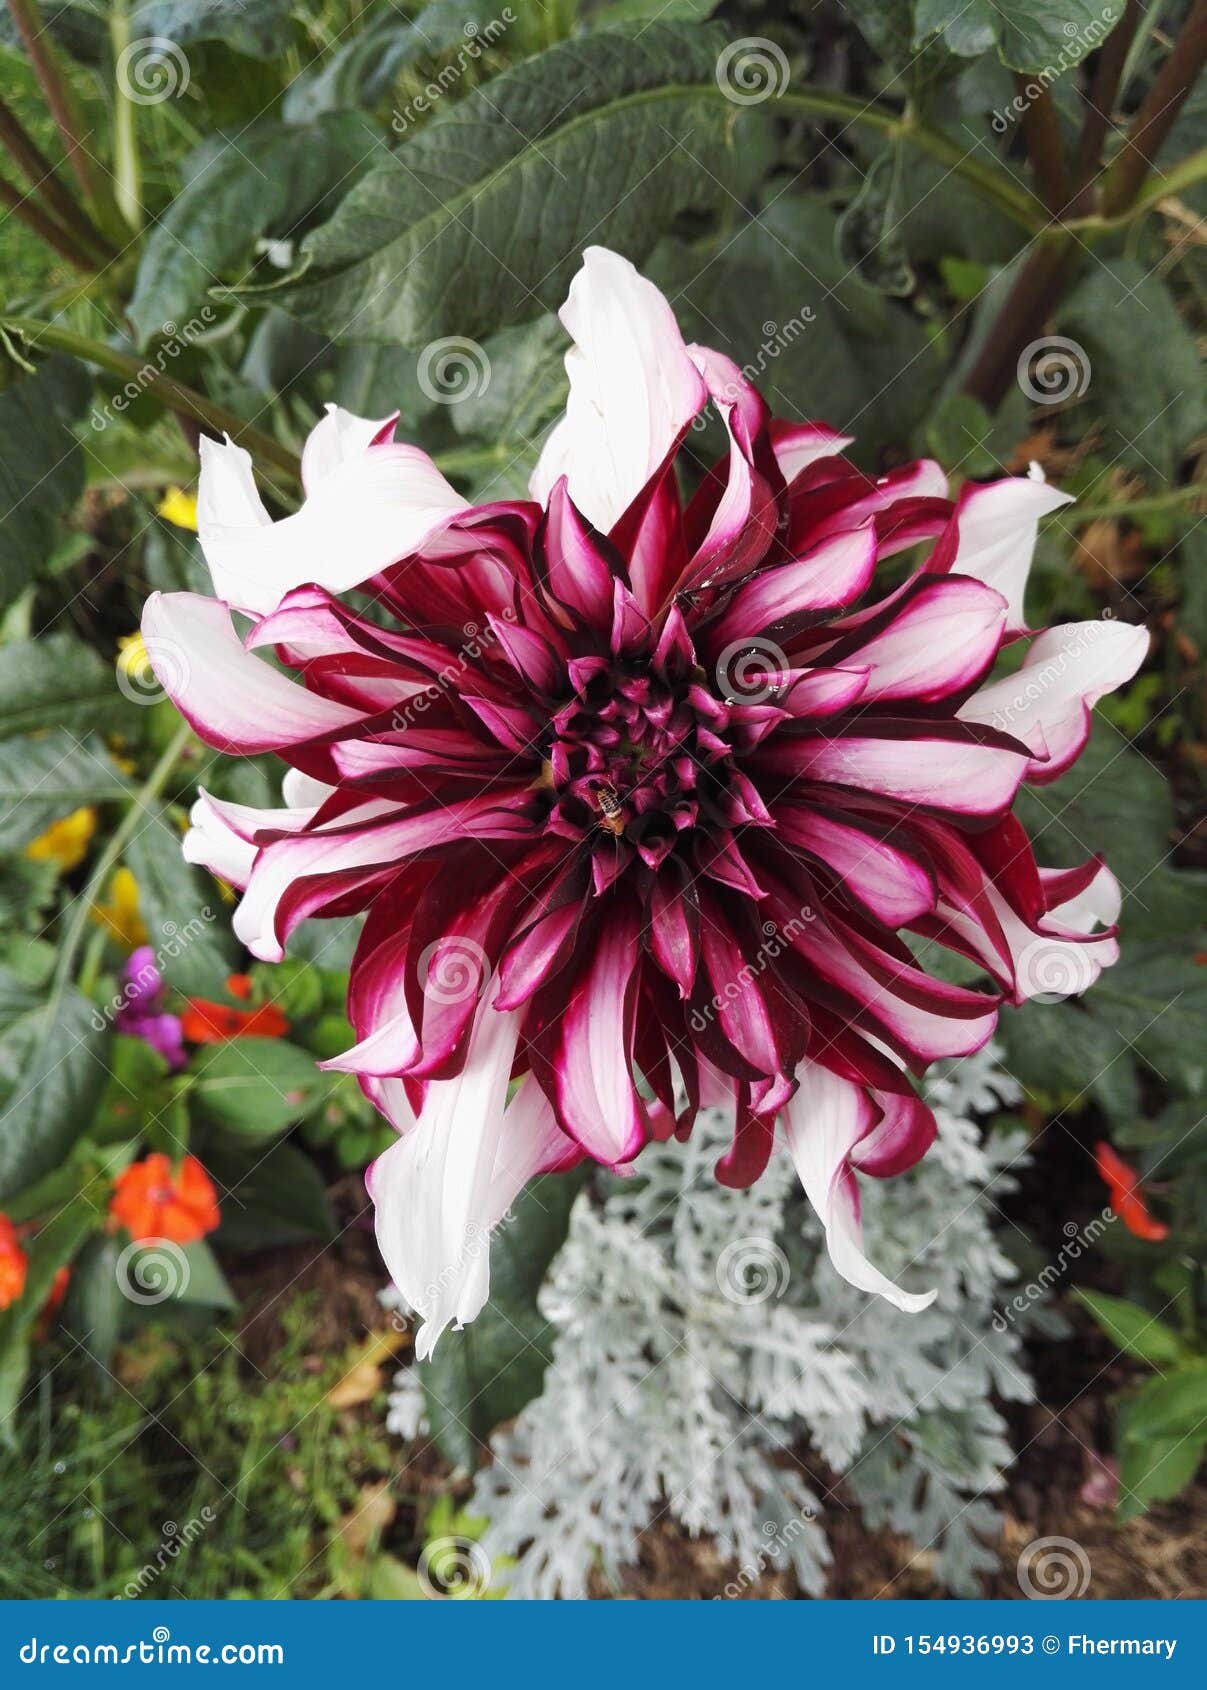 close-up view of a dahlia `contraste` garnet and white decorative visited by an insect